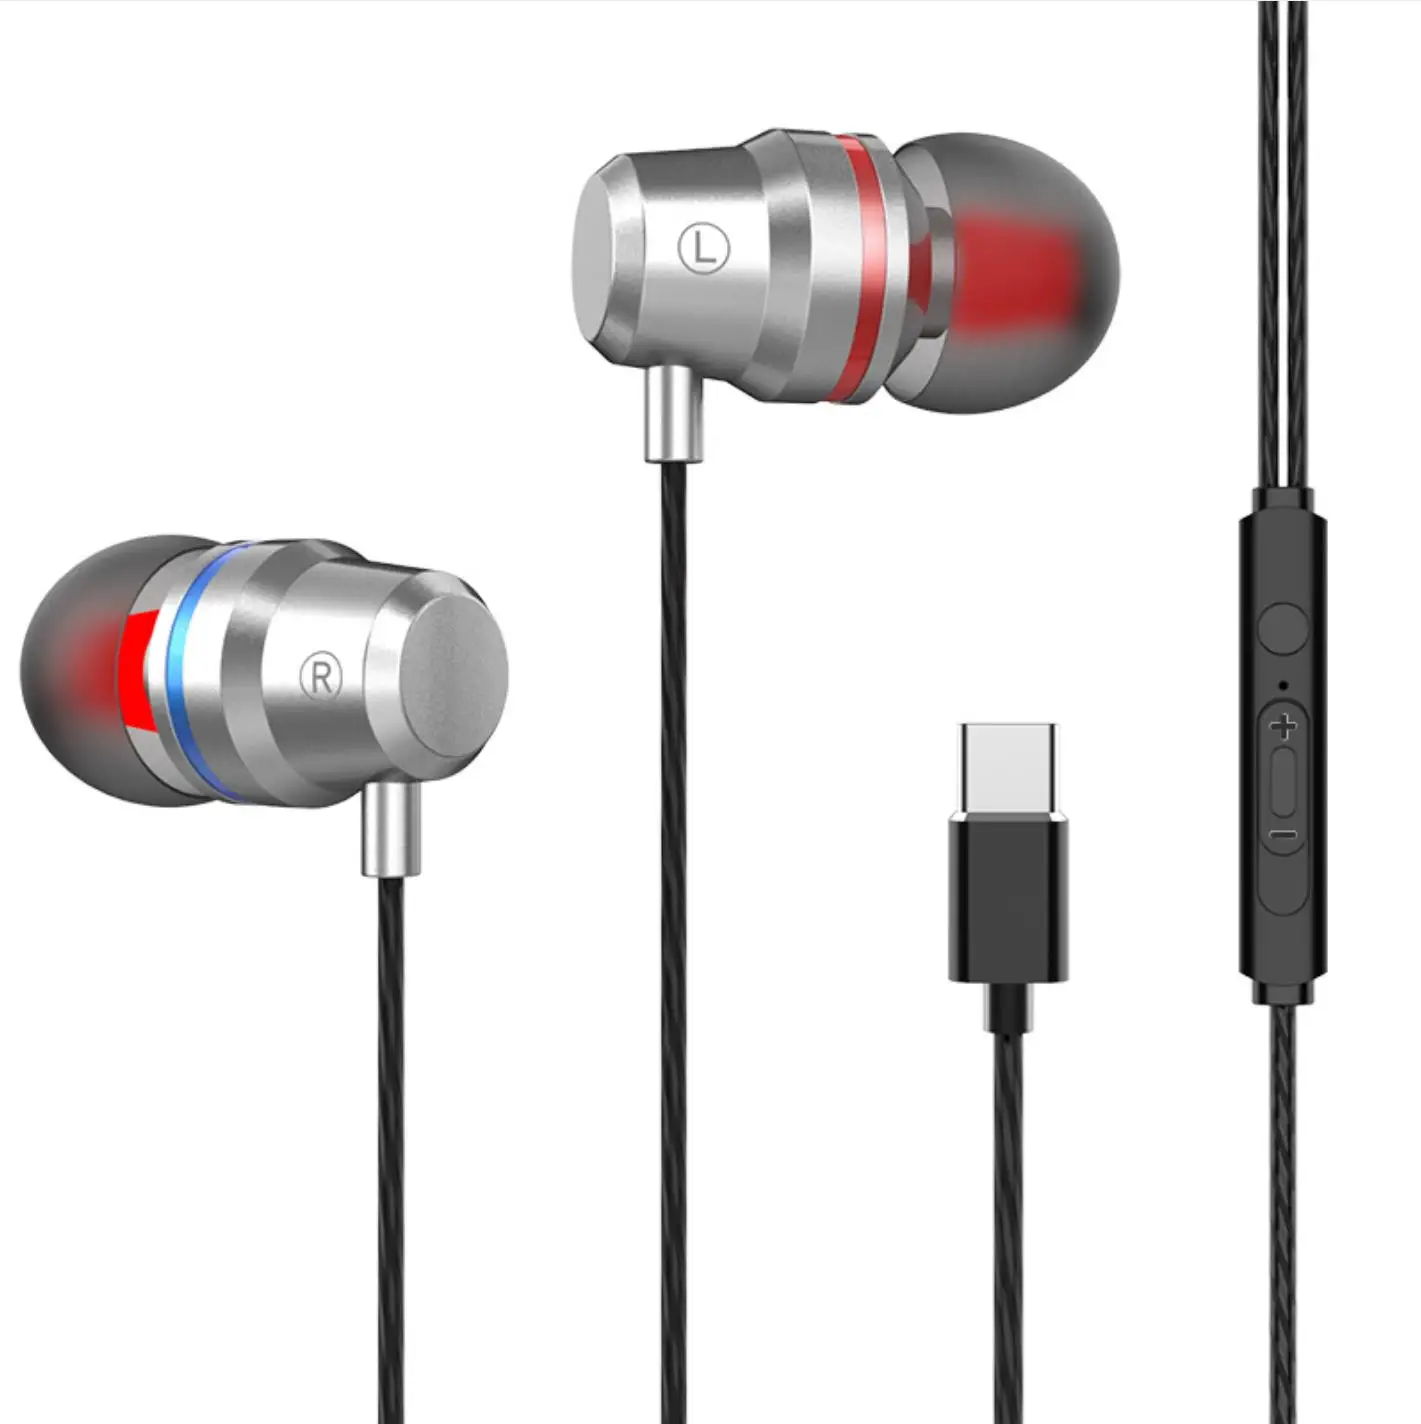 

Headphones with Microphone headset G2 Type-C Earbuds bass earphone wired earphone, Black, silver, red, pink, gold